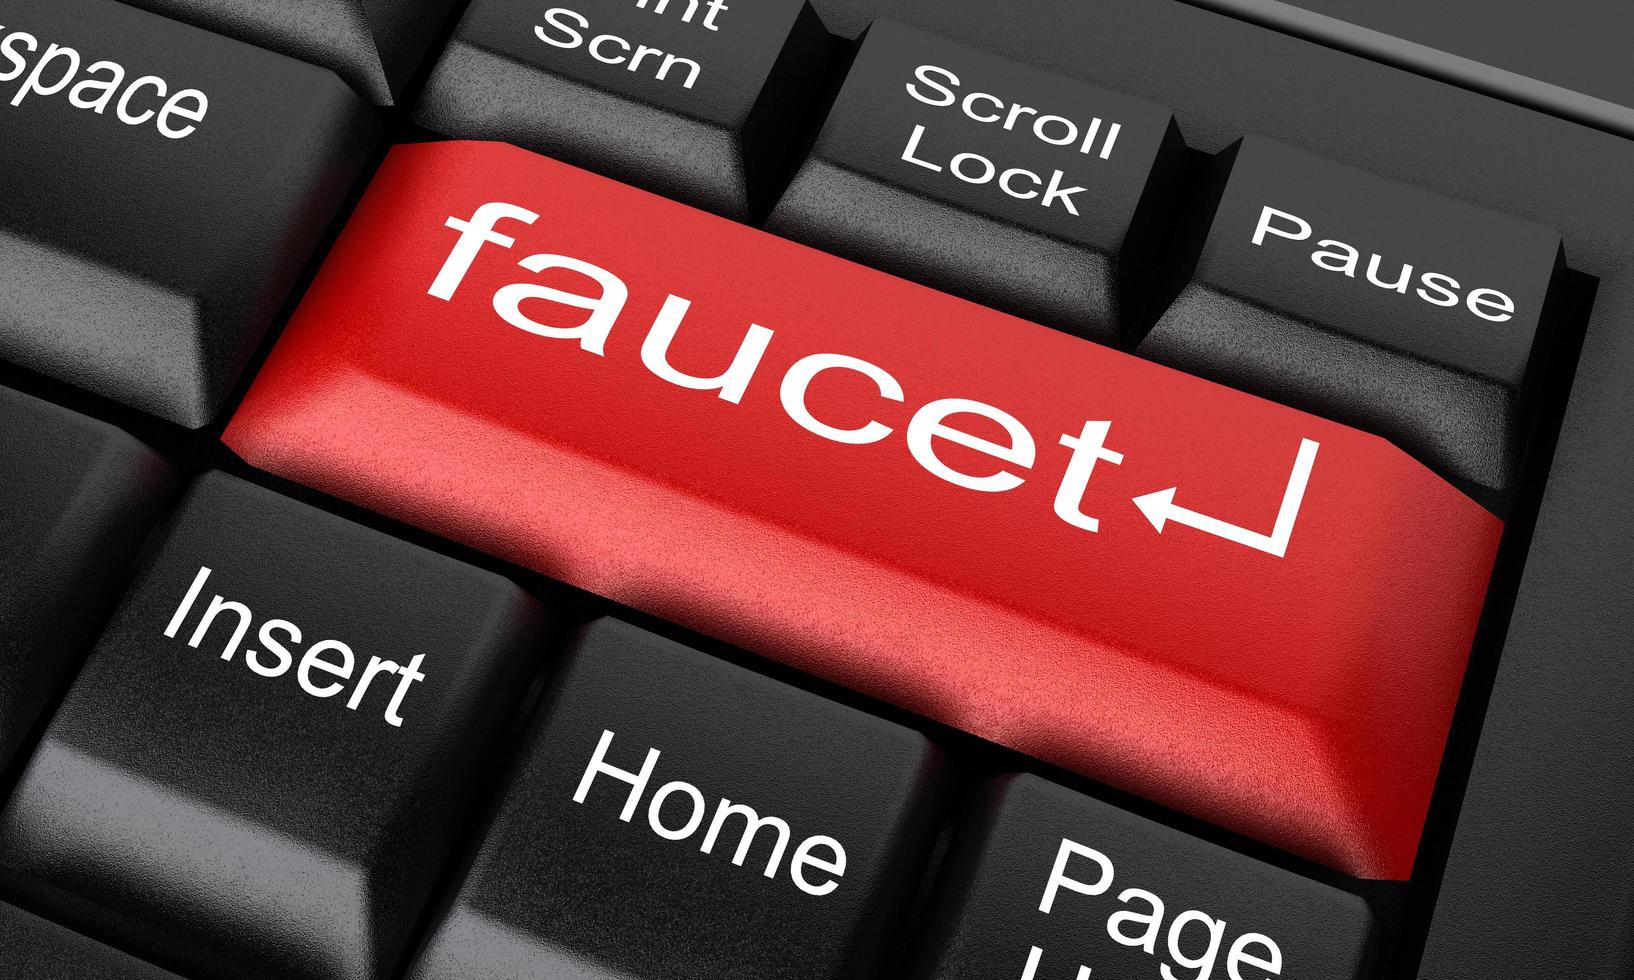 faucet word on red keyboard button photo